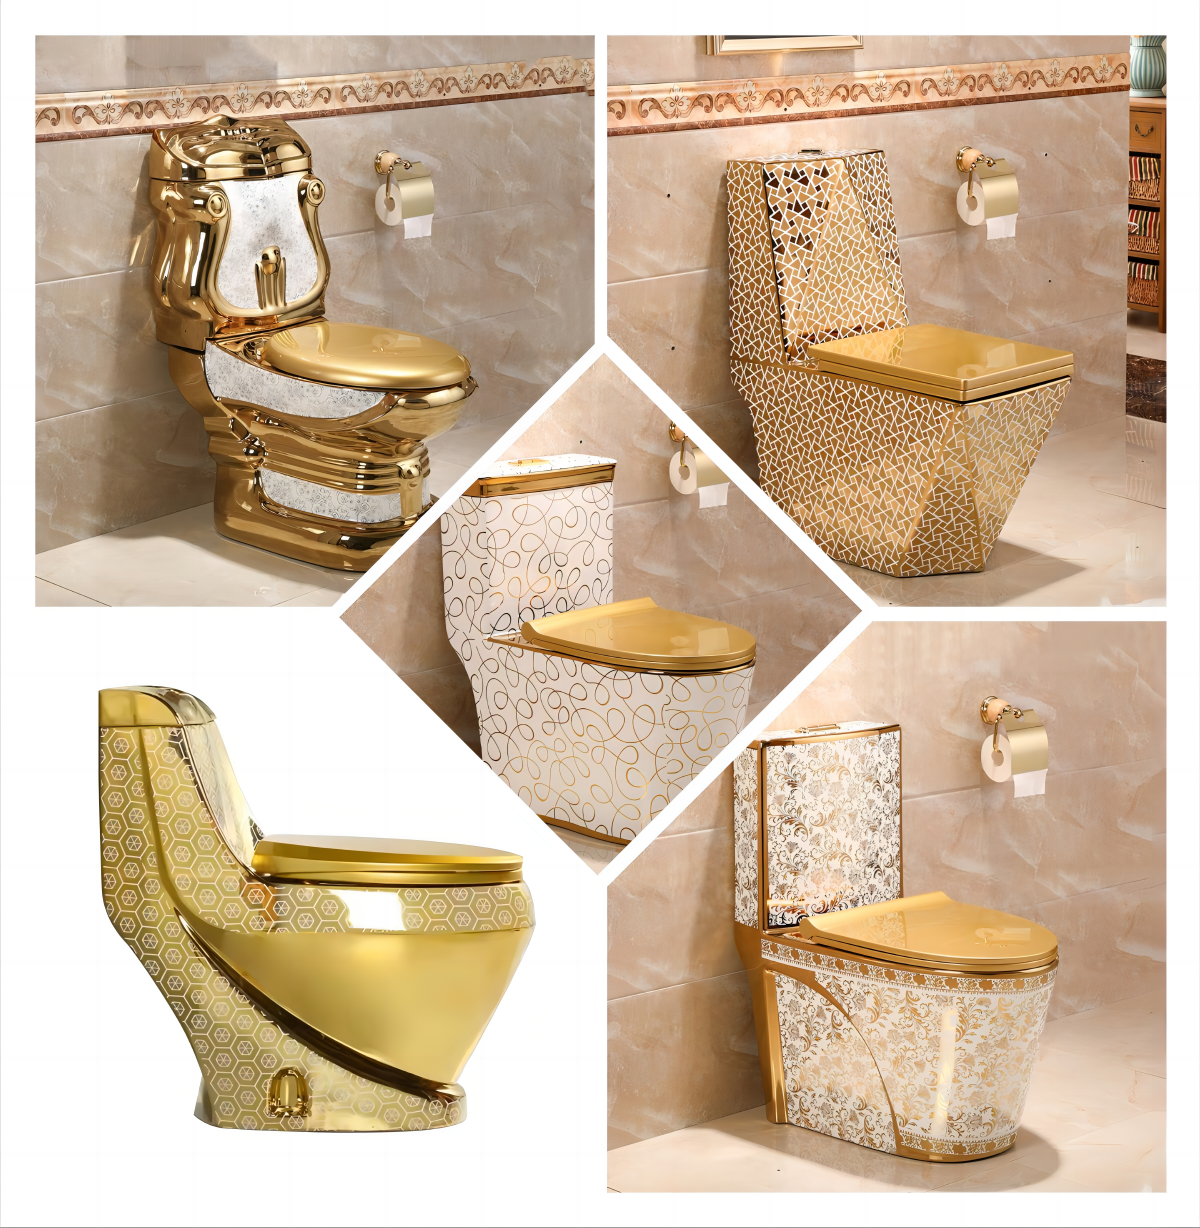 Middle East hot-selling golden toilet electroplated ceramic super swirl water-saving and odor-proof luxury toilet color toilet